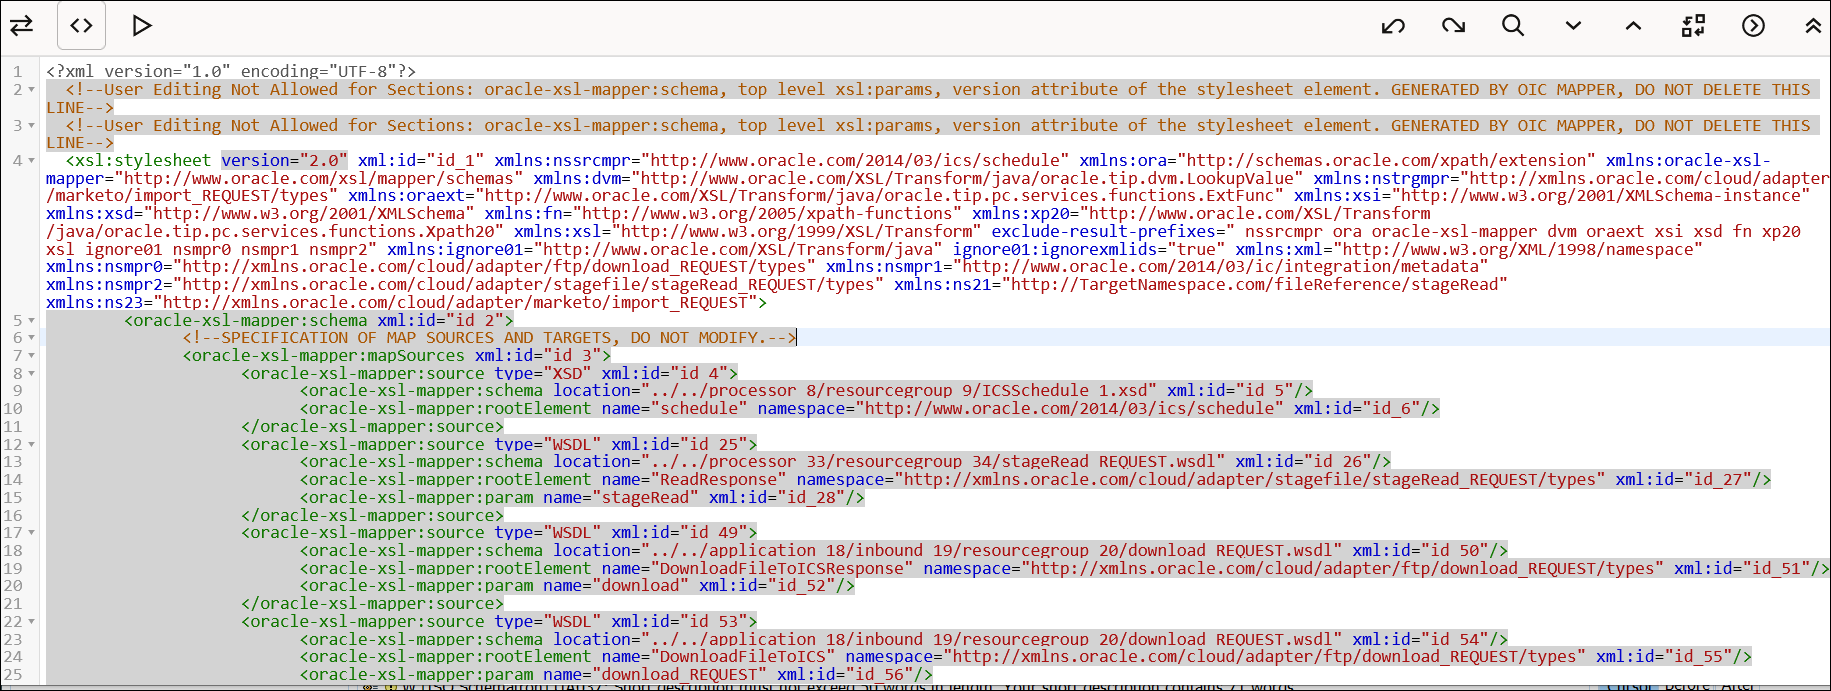 This image shows the XSLT code view of your mappings. Sections at the very top of the code do not allow editing. Above the code are three icons to the left and eight icons to the right.